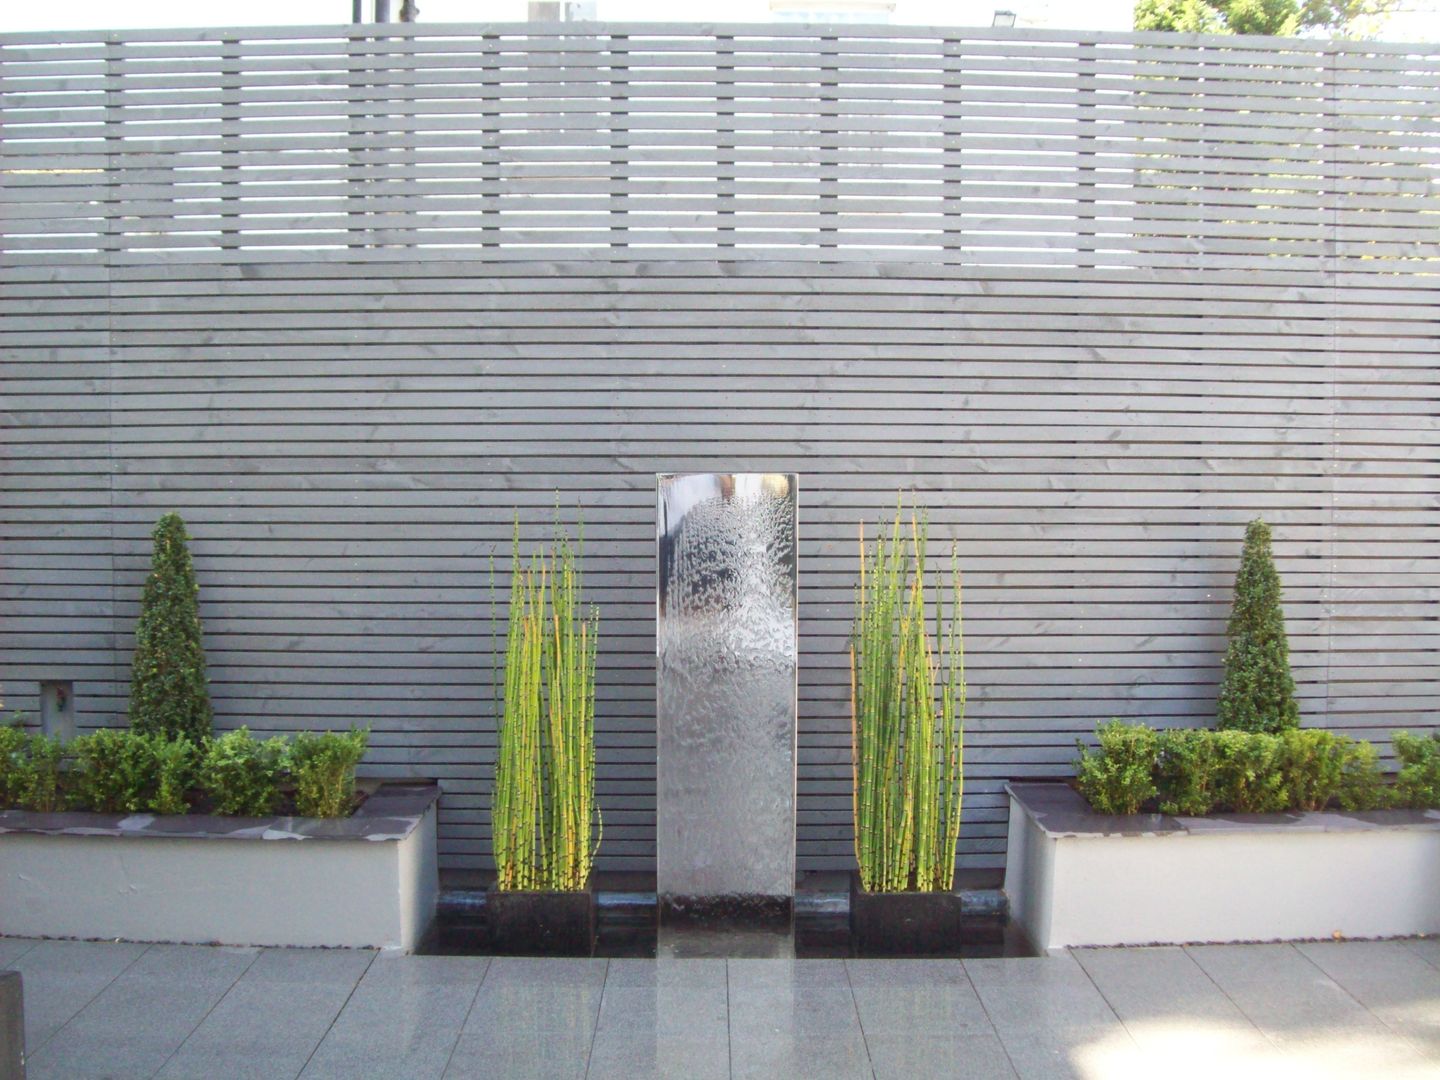 Stainless Steel Metal Water Feature Unique Landscapes Modern style gardens